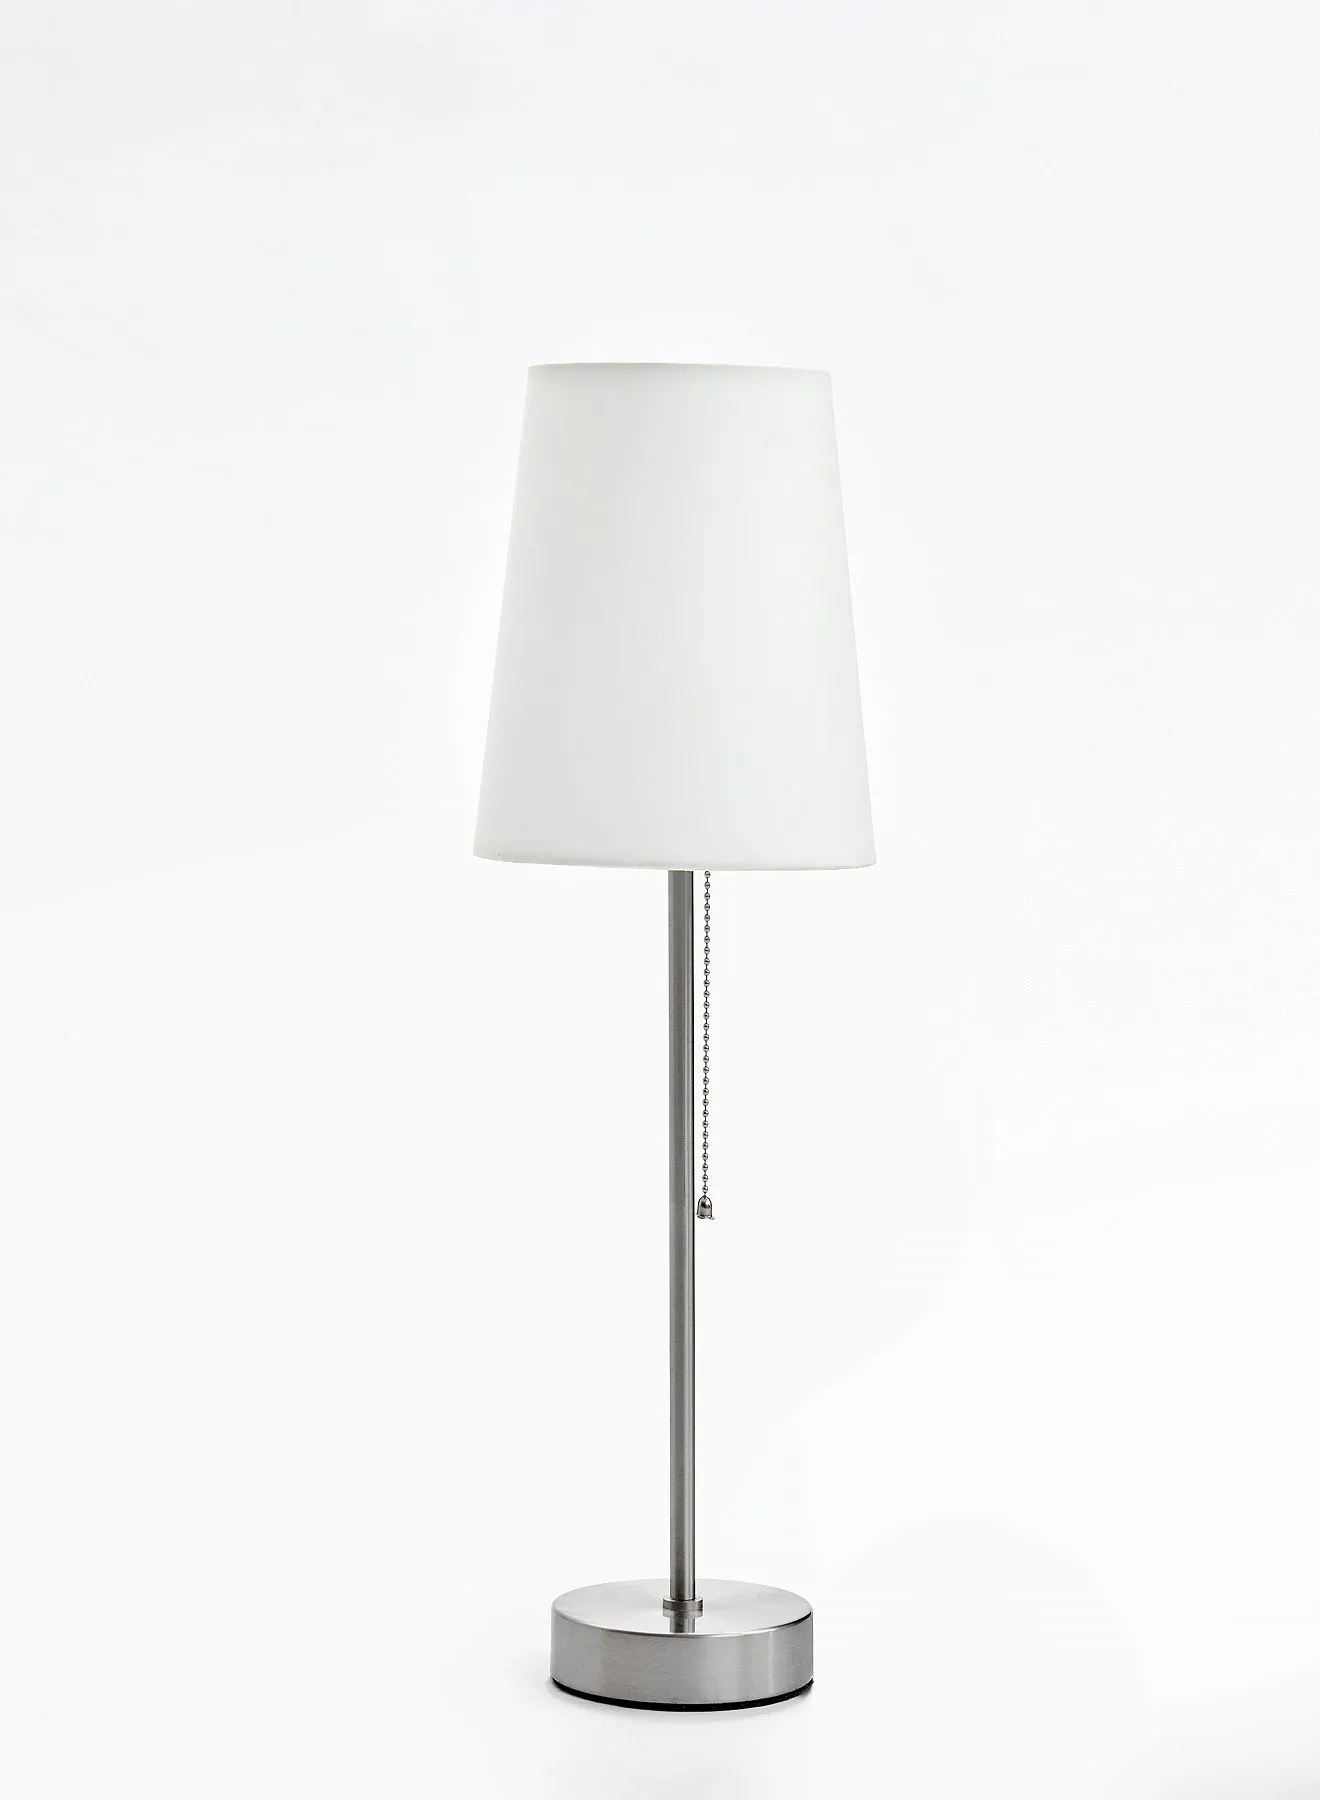 Switch Decorative Table Lamp Unique Luxury Quality Material for the Perfect Stylish Home TL000002 Silver/White 20 x 48cm